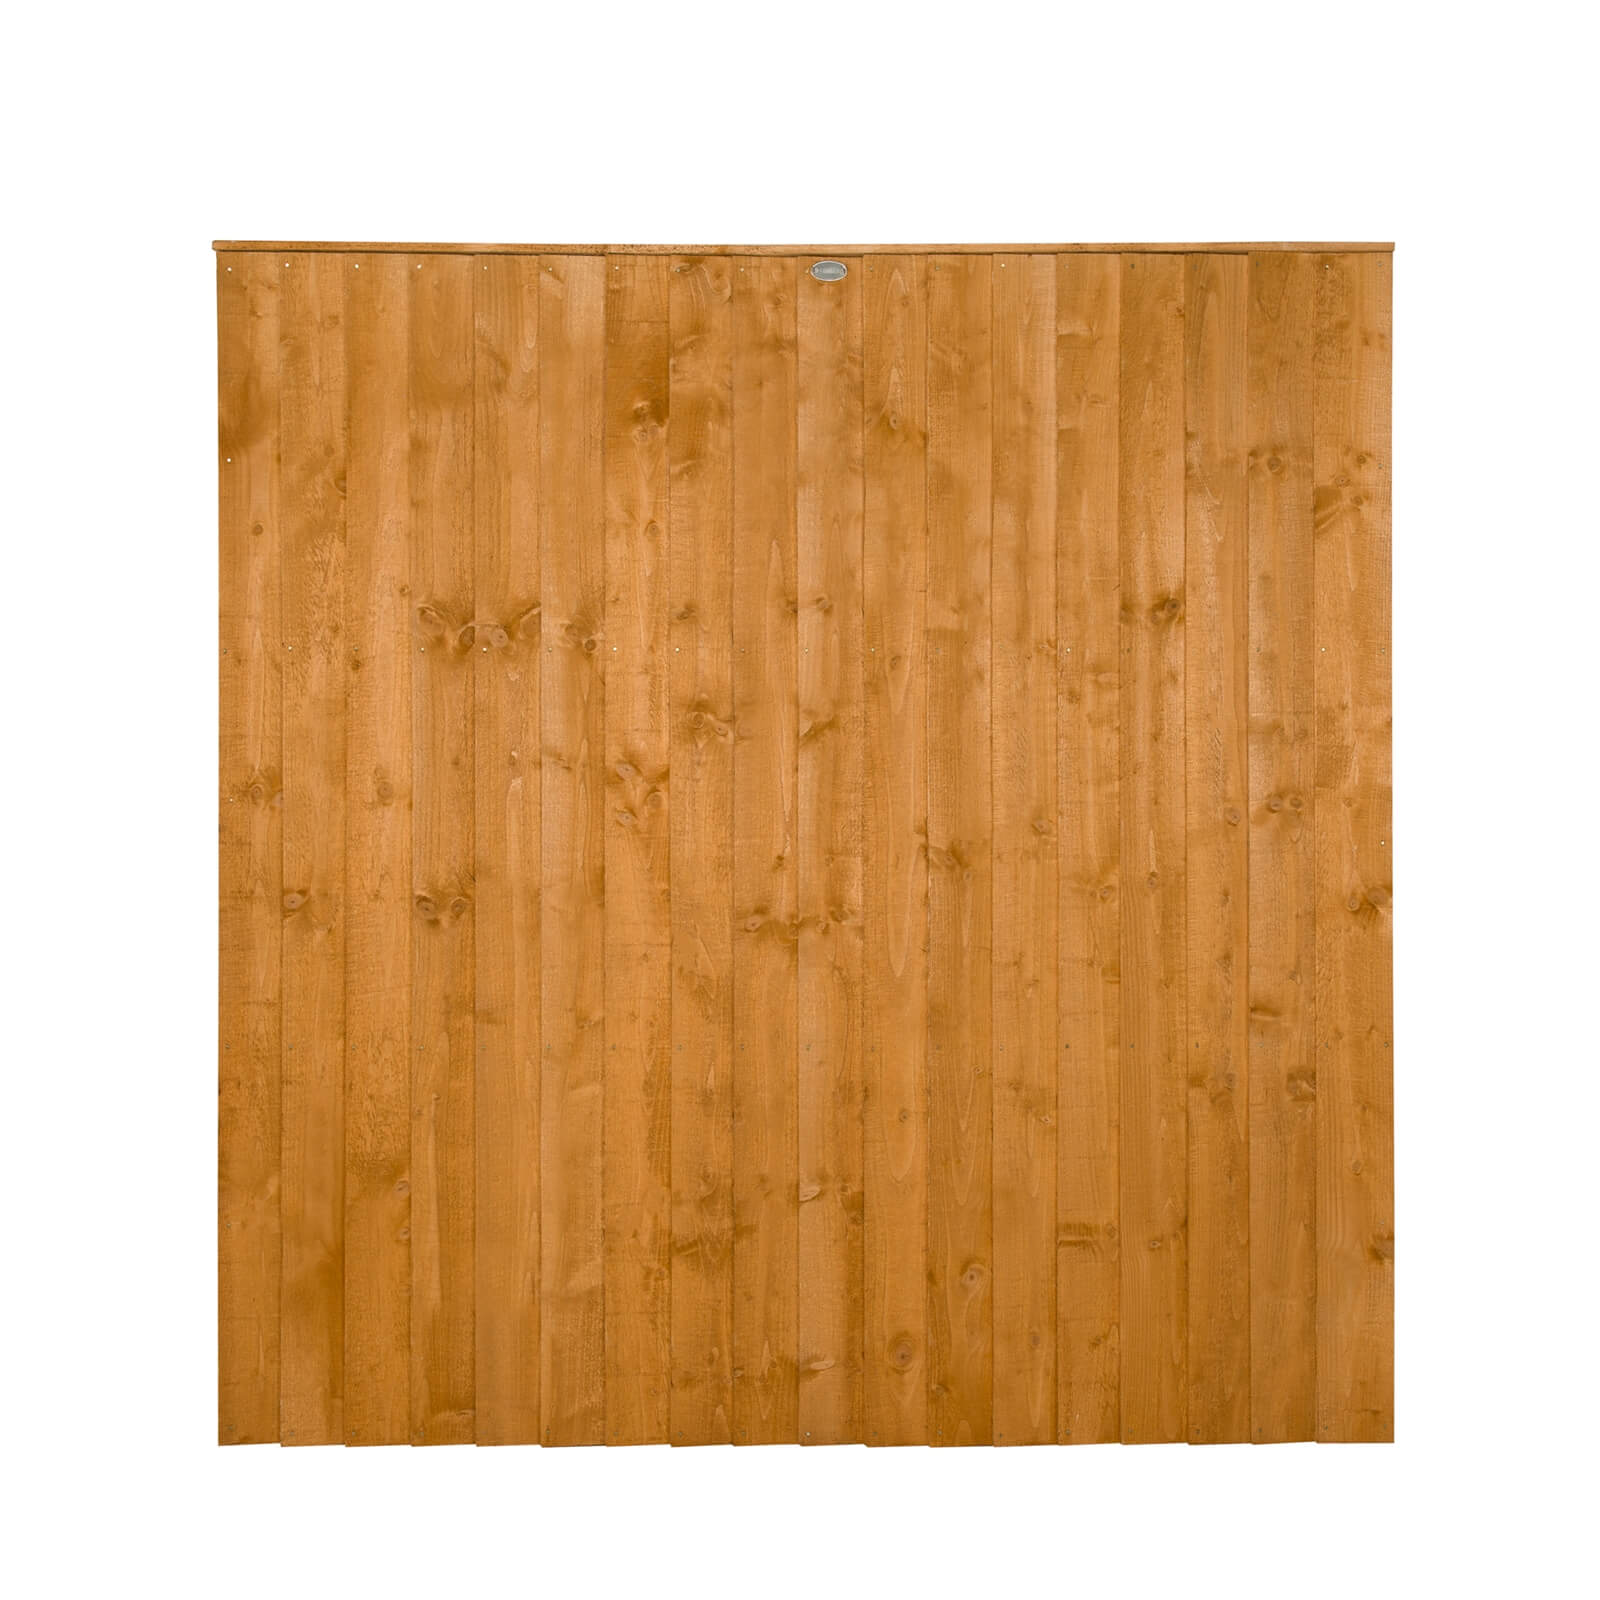 Forest Featherdge Fence Panel - 6ft - Pack of 5